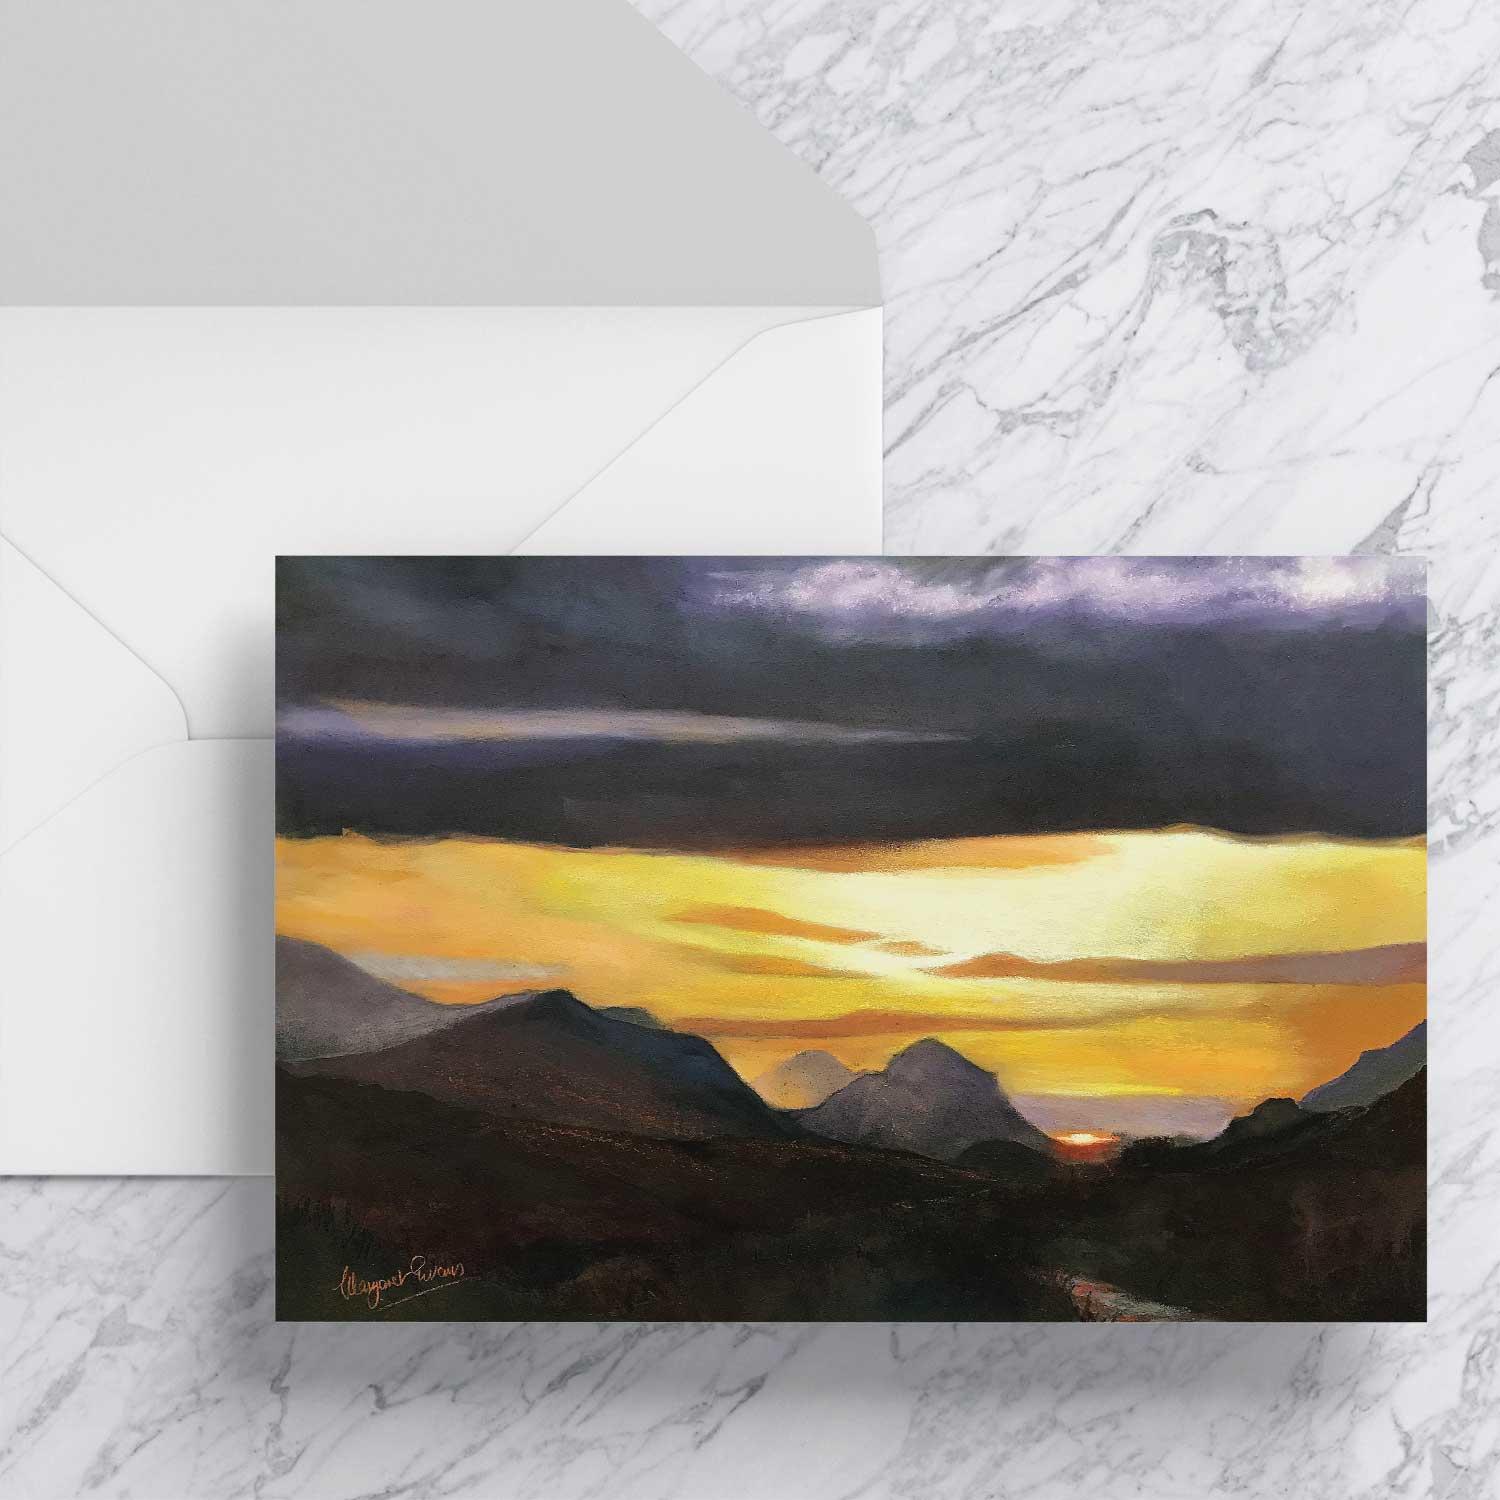 Dark Clouds over Cuillins Greeting Card from an original painting by artist Margaret Evans